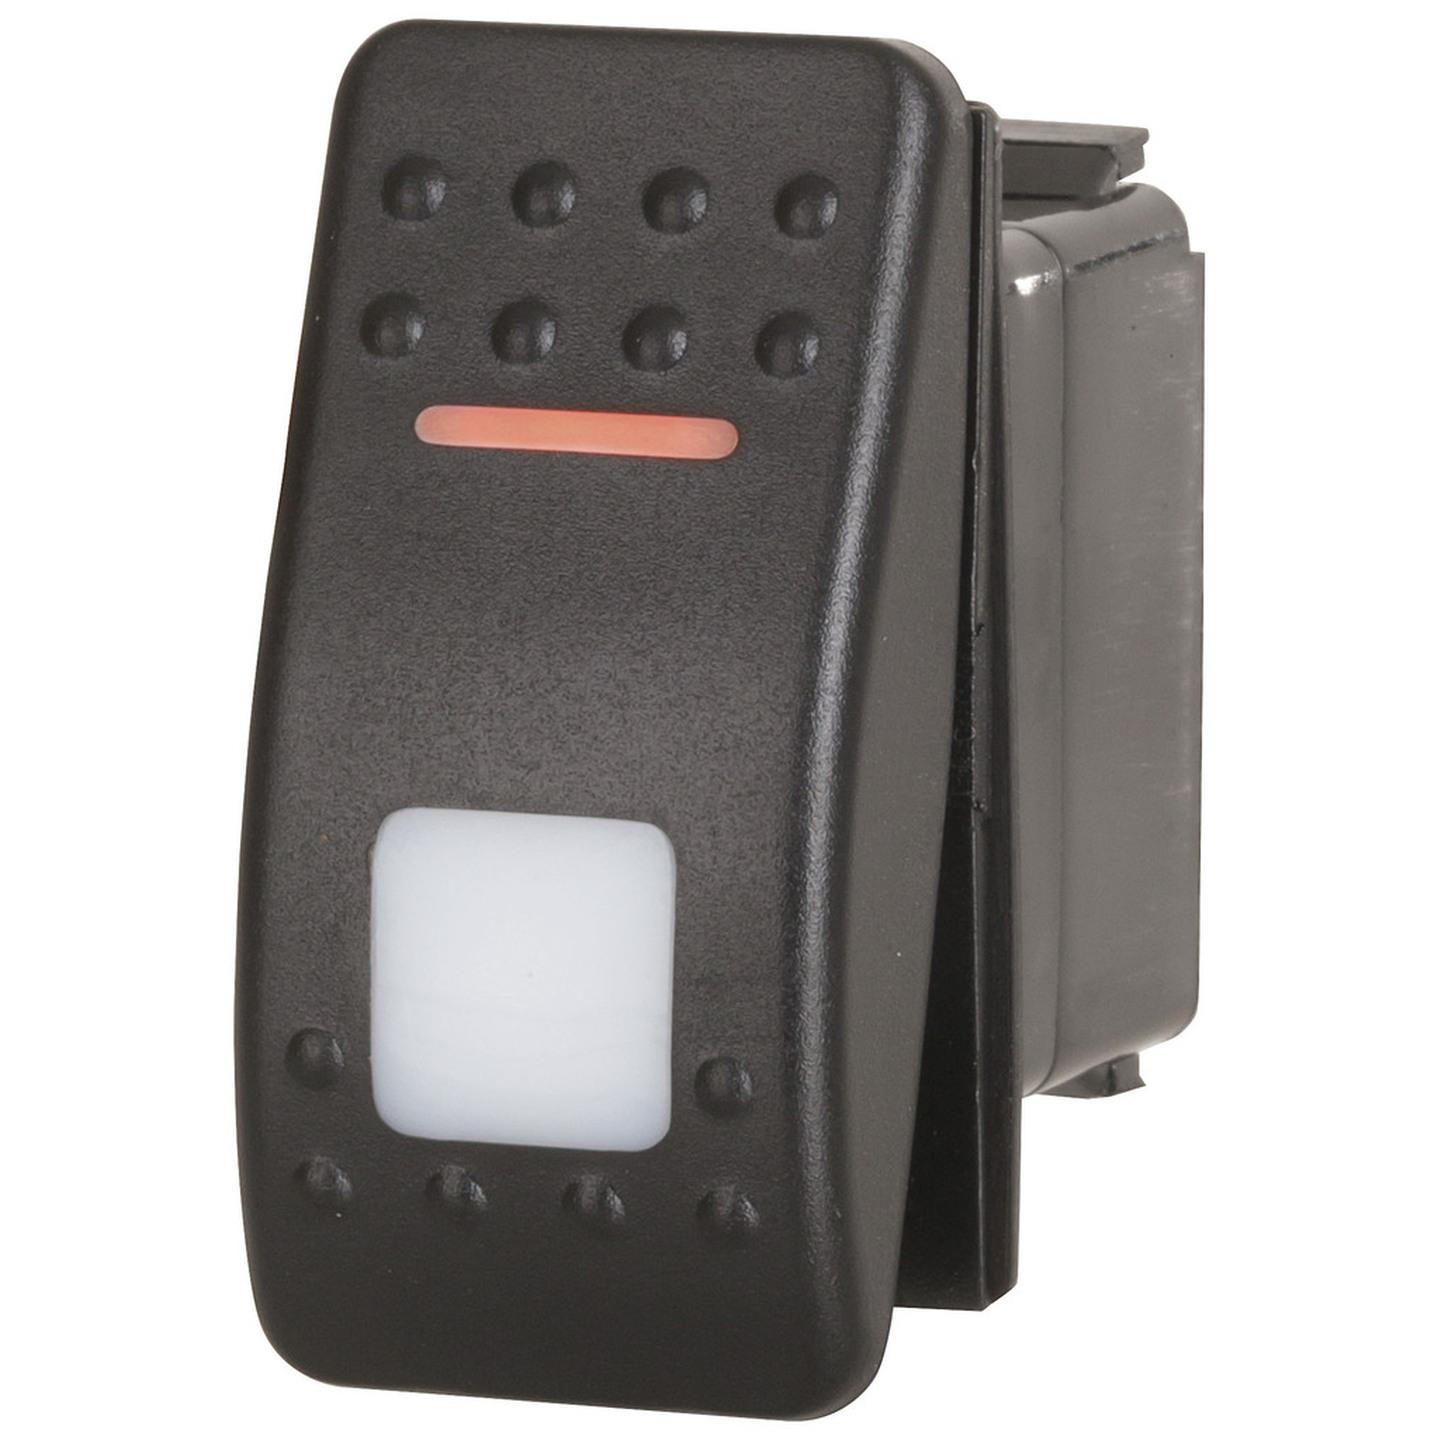 SPDT Dual Illuminated Rocker Switch with Labels and Interchangeable Covers Orange